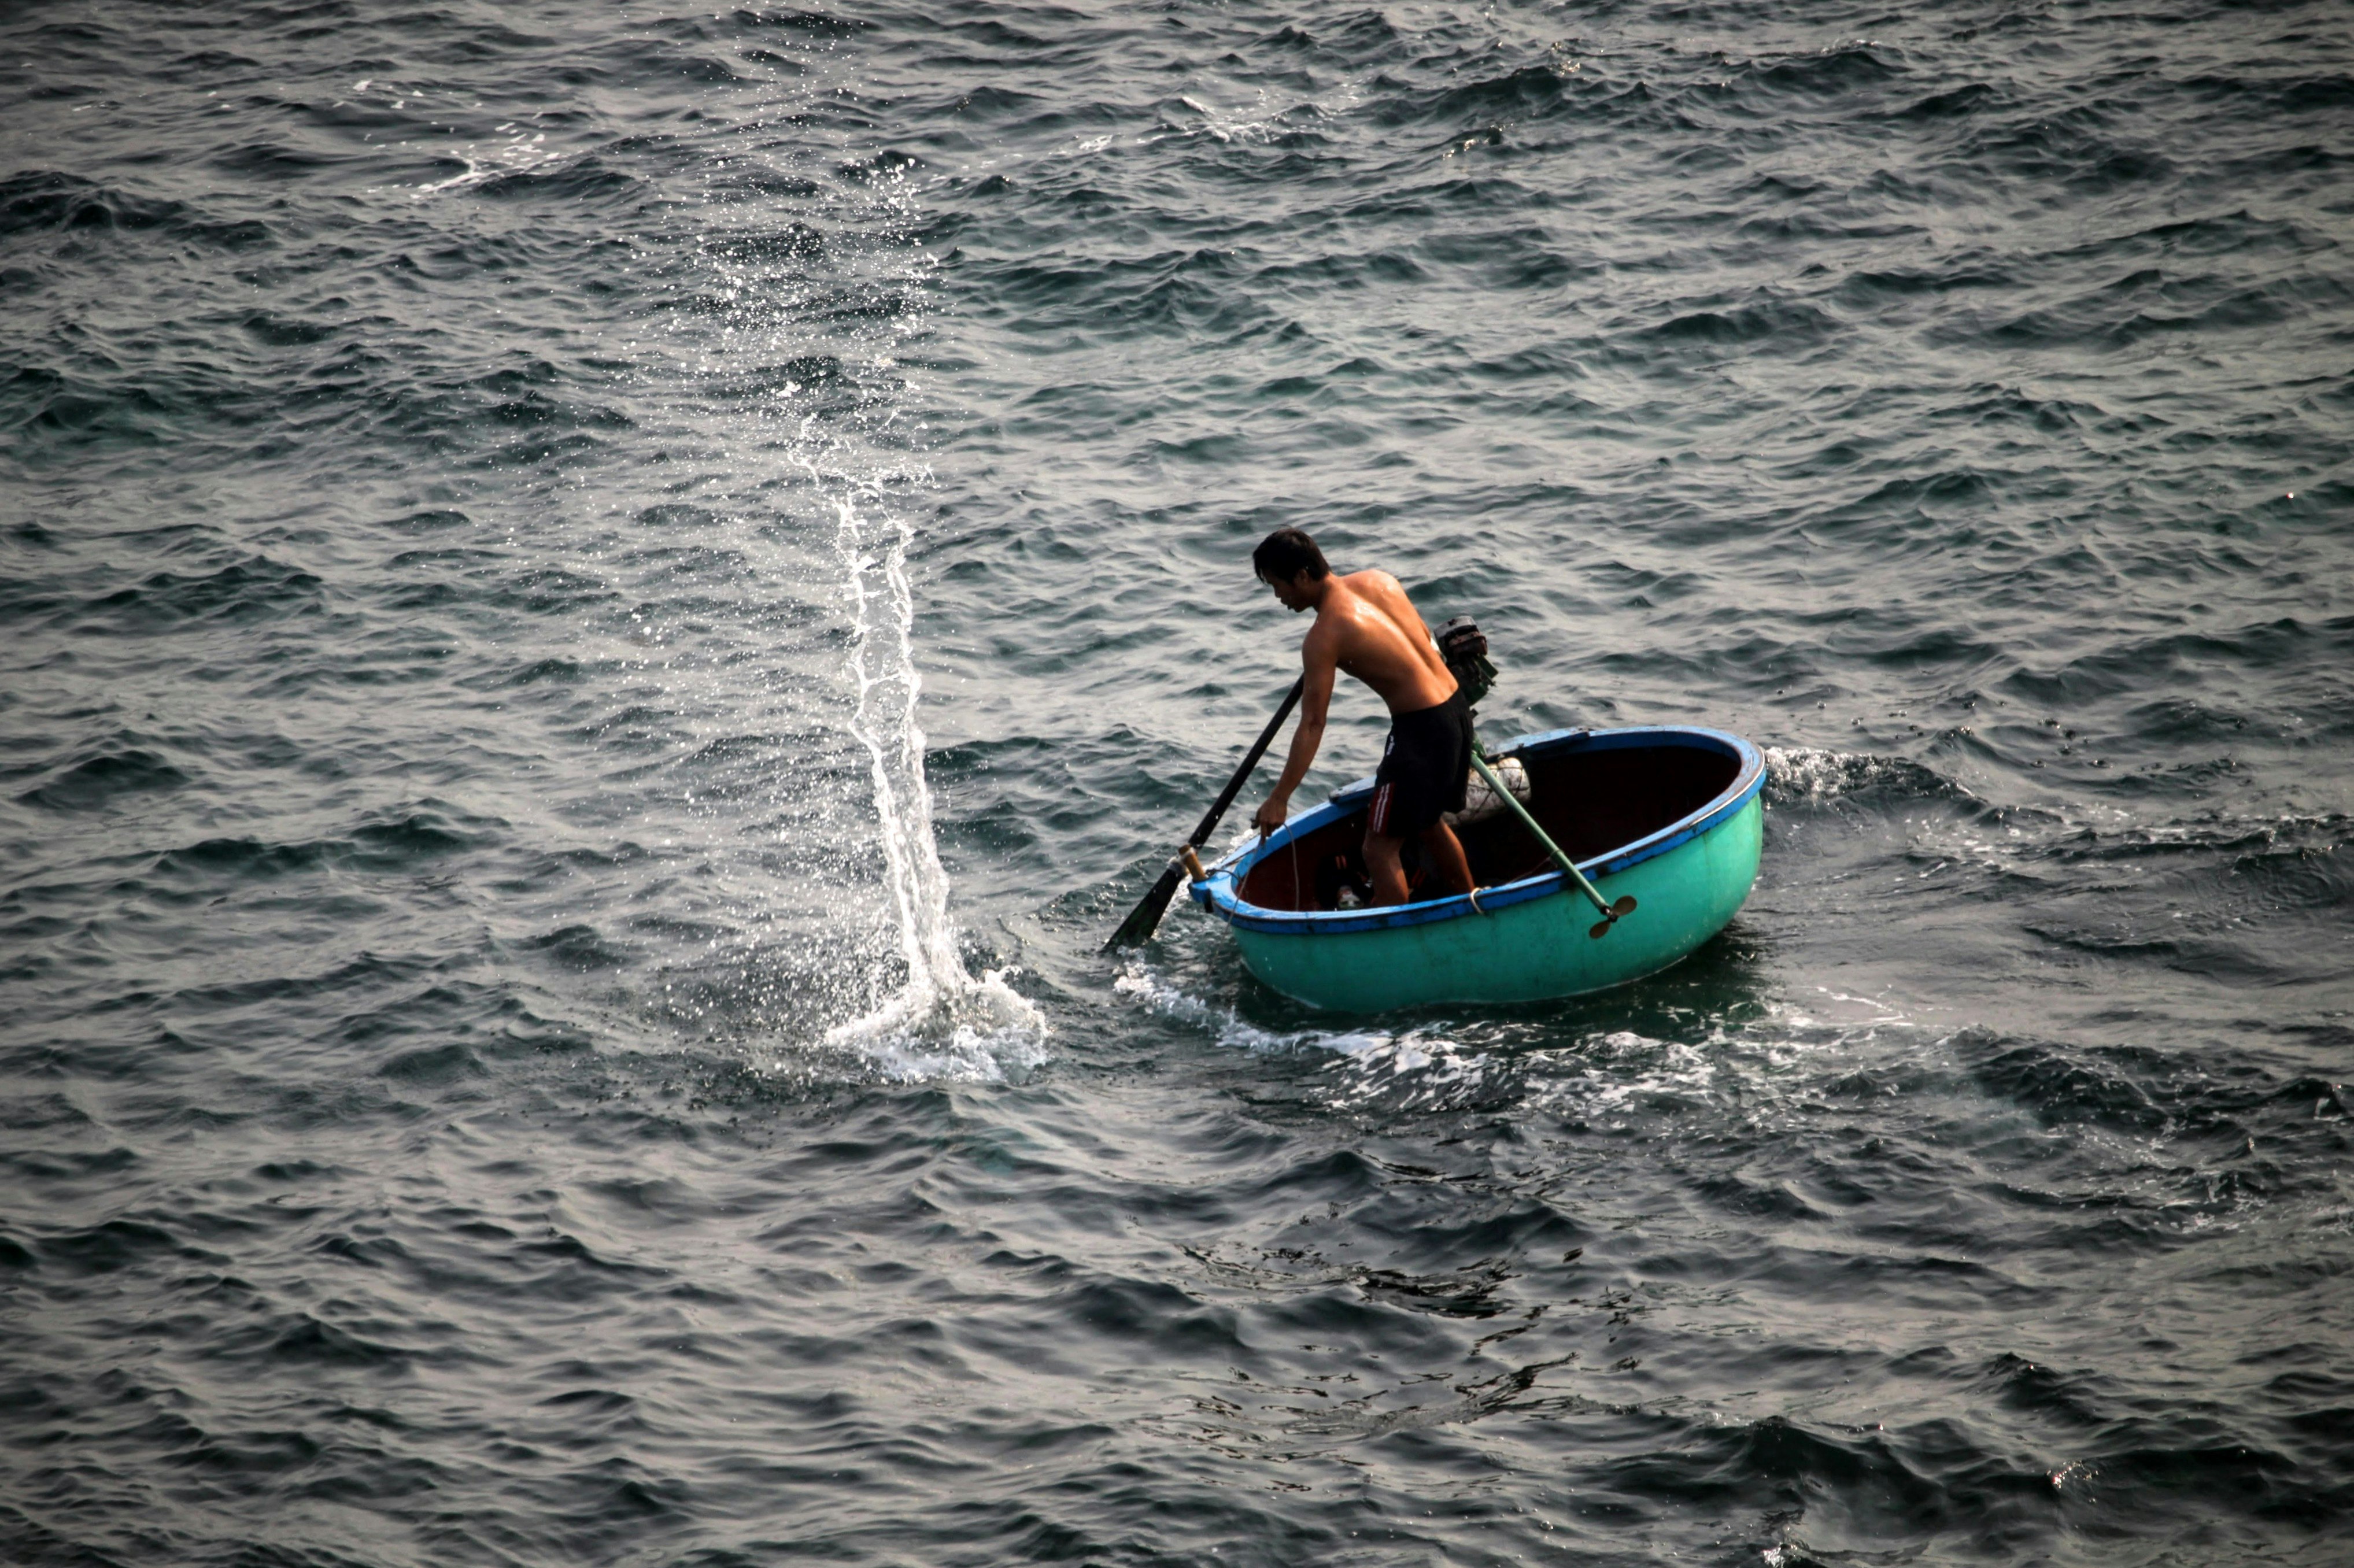 man riding on round green boat at daytime